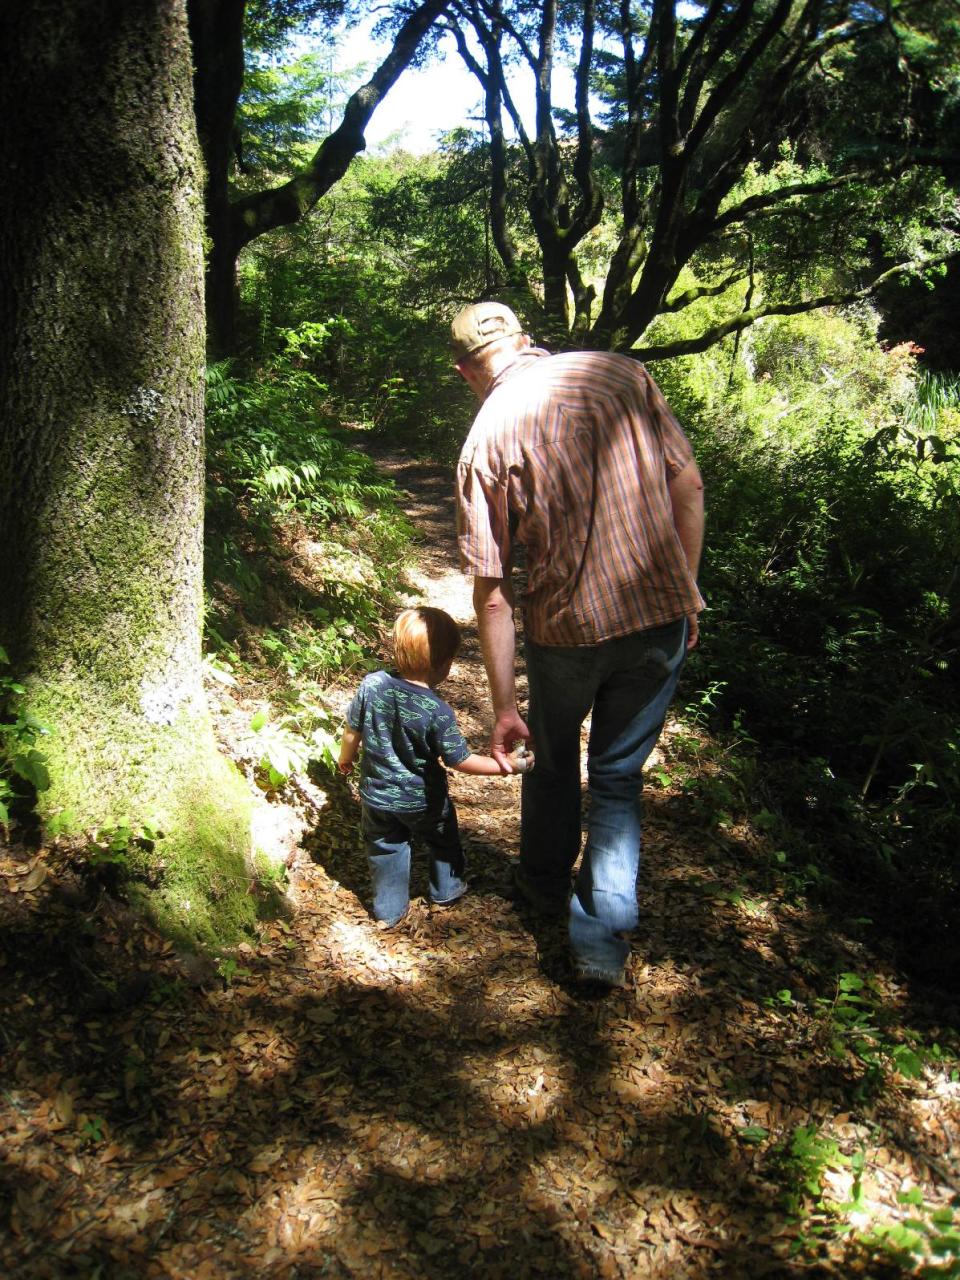 In this 2008 photo provided by courtesy of Stroller Hikes, a father and son bond during a Stroller Hikes family hike up Pomponio Canyon Trail toward Mount Ellen near Memorial County Park in Pescadero, Calif. Stroller Hikes Toddler Treks encourage parents to slow down to appreciate the world through the eyes of their children, while also encouraging youth to become active, engaged participants in hikes. (AP Photo/Courtesy Stroller Hikes, Debbie Frazier)